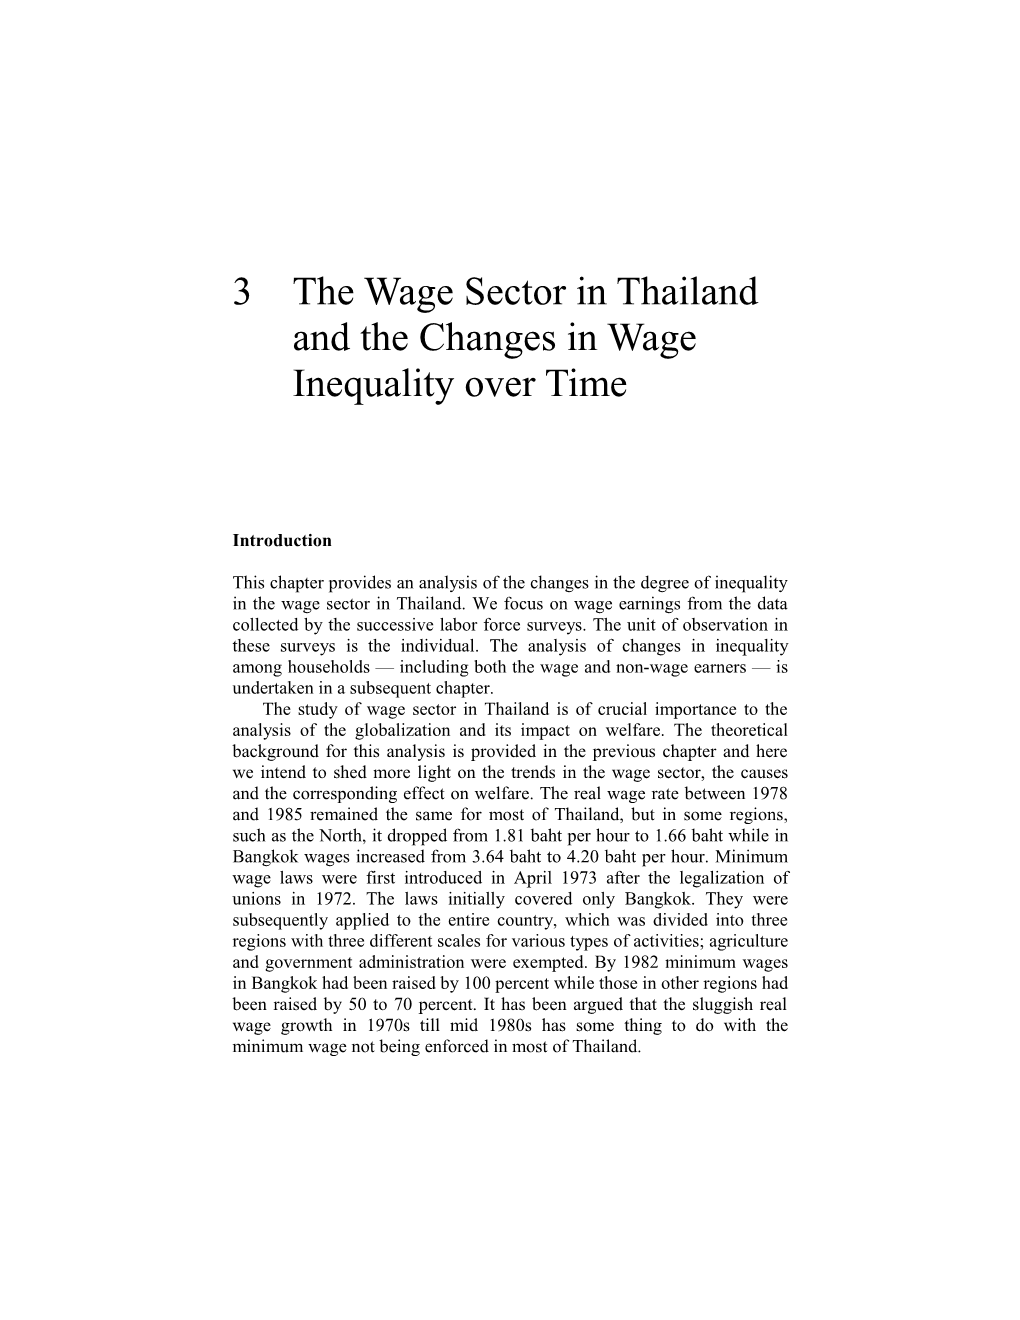 3The Wage Sector in Thailand and the Changes in Wage Inequality Over Time